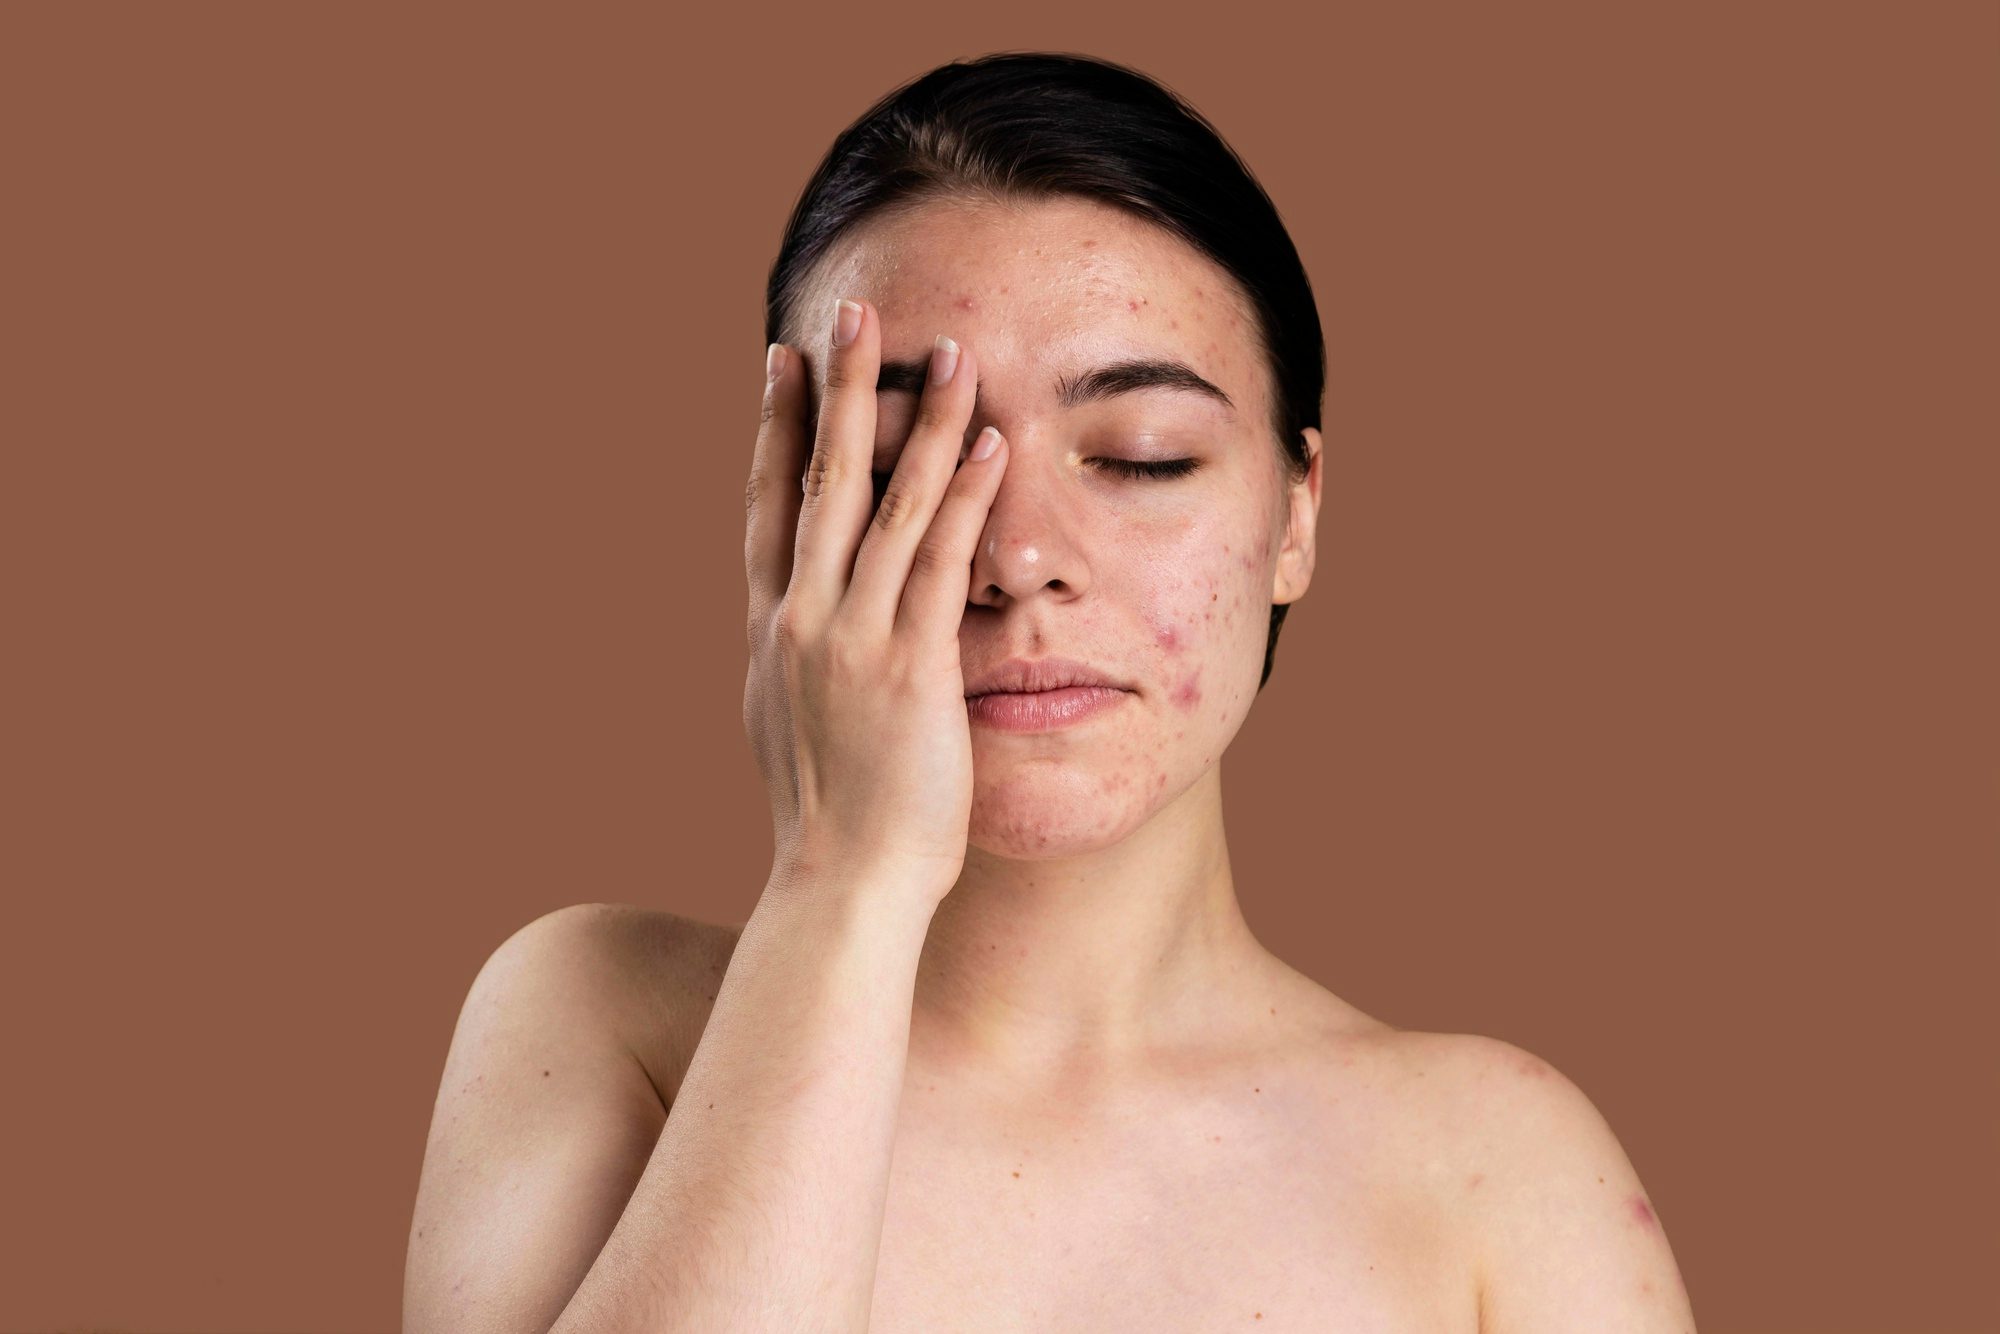 What You Should Do to Prevent Dry Skin